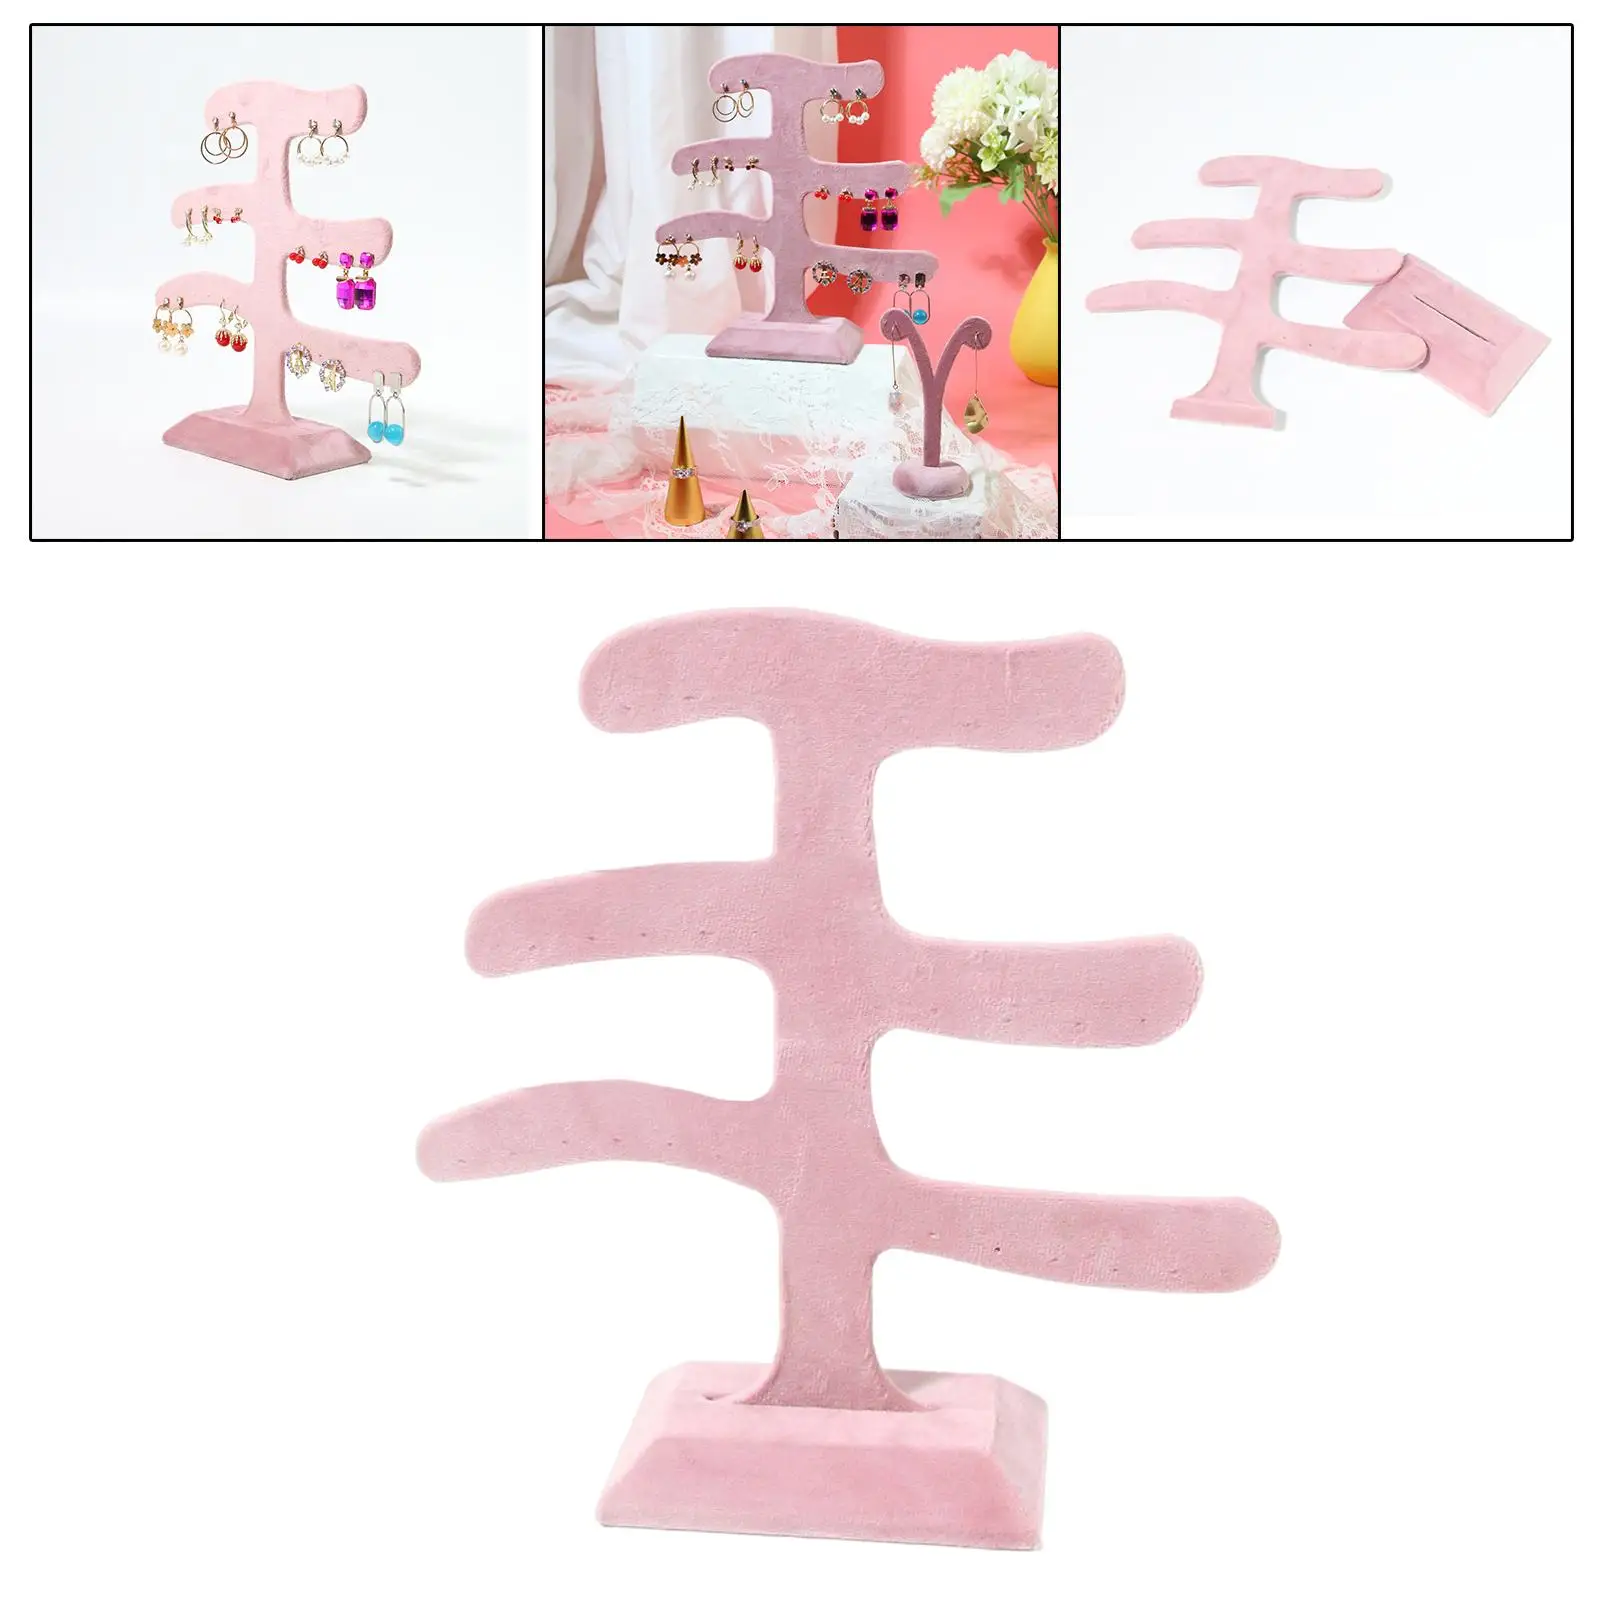 Earrings Holder Stand Jewelry Display Flannel Hanging Rack Organizer Tree for Photography Props Tabletop Showcase Showroom Shops